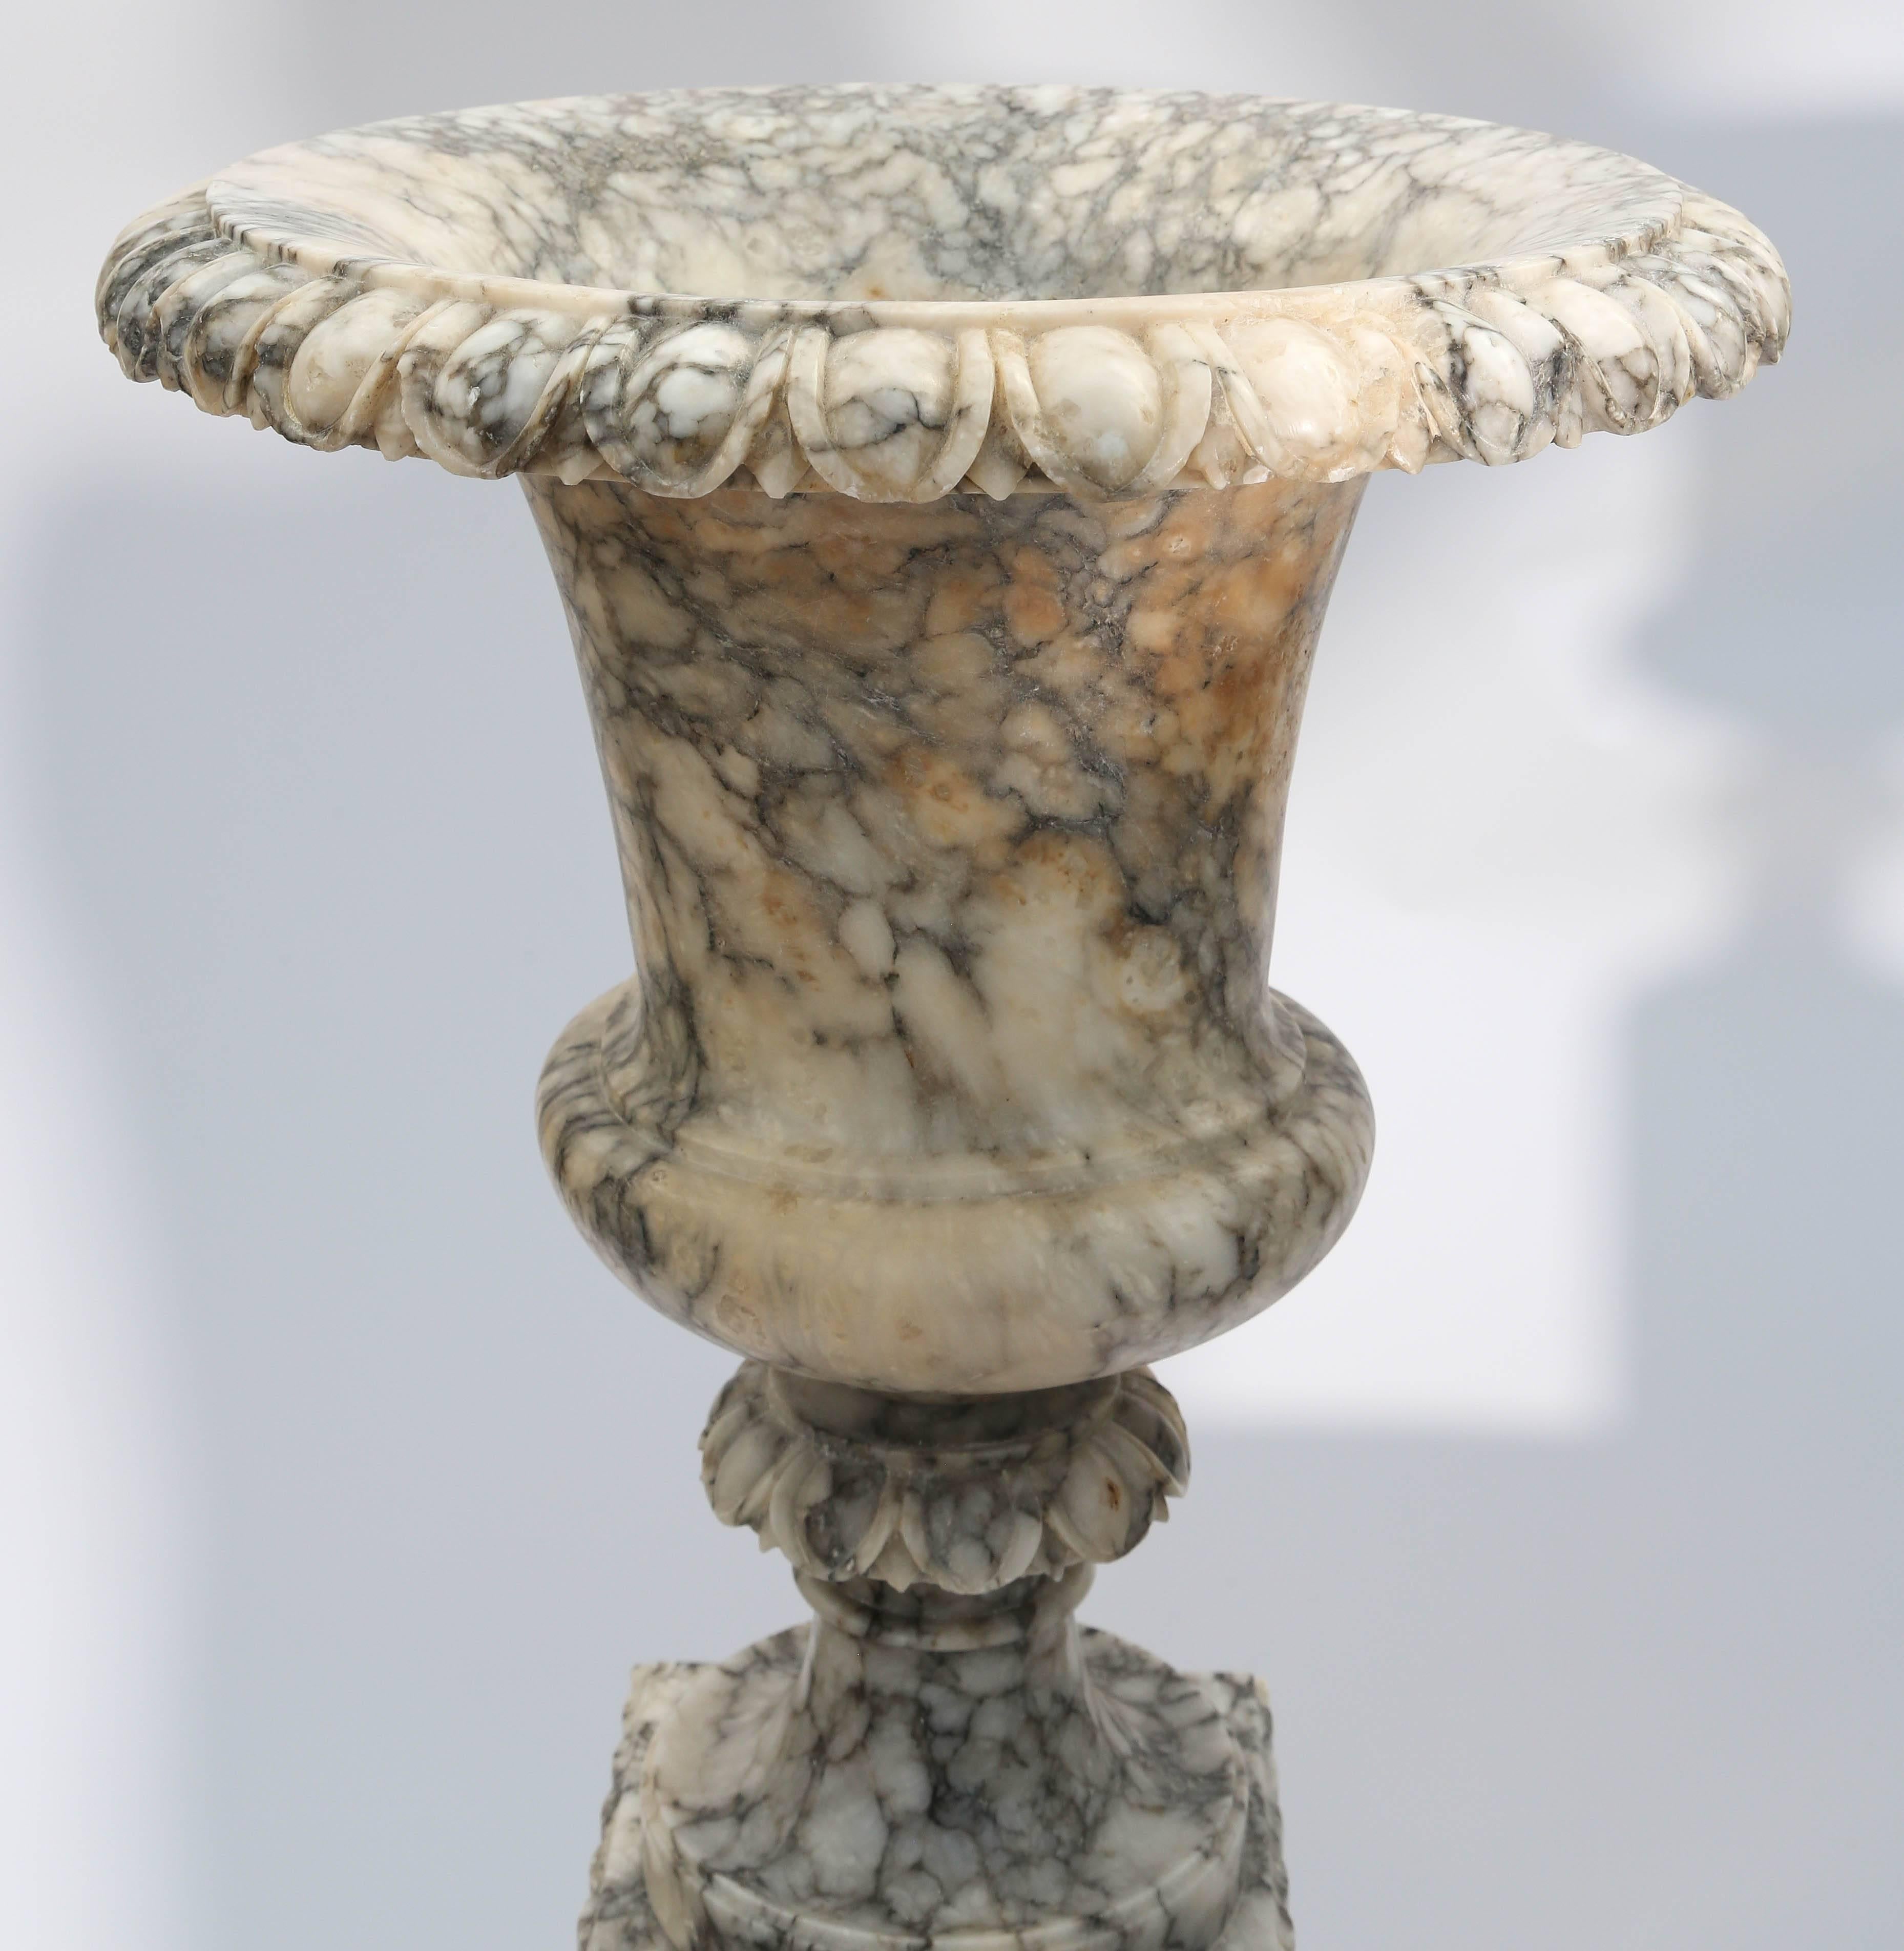 Pair of campana form urns on stands, of alabaster, both with egg-and-dart decorated rims and socles, on round foot, set upon graduating, fluted, square plinths.

Stock ID: D1914